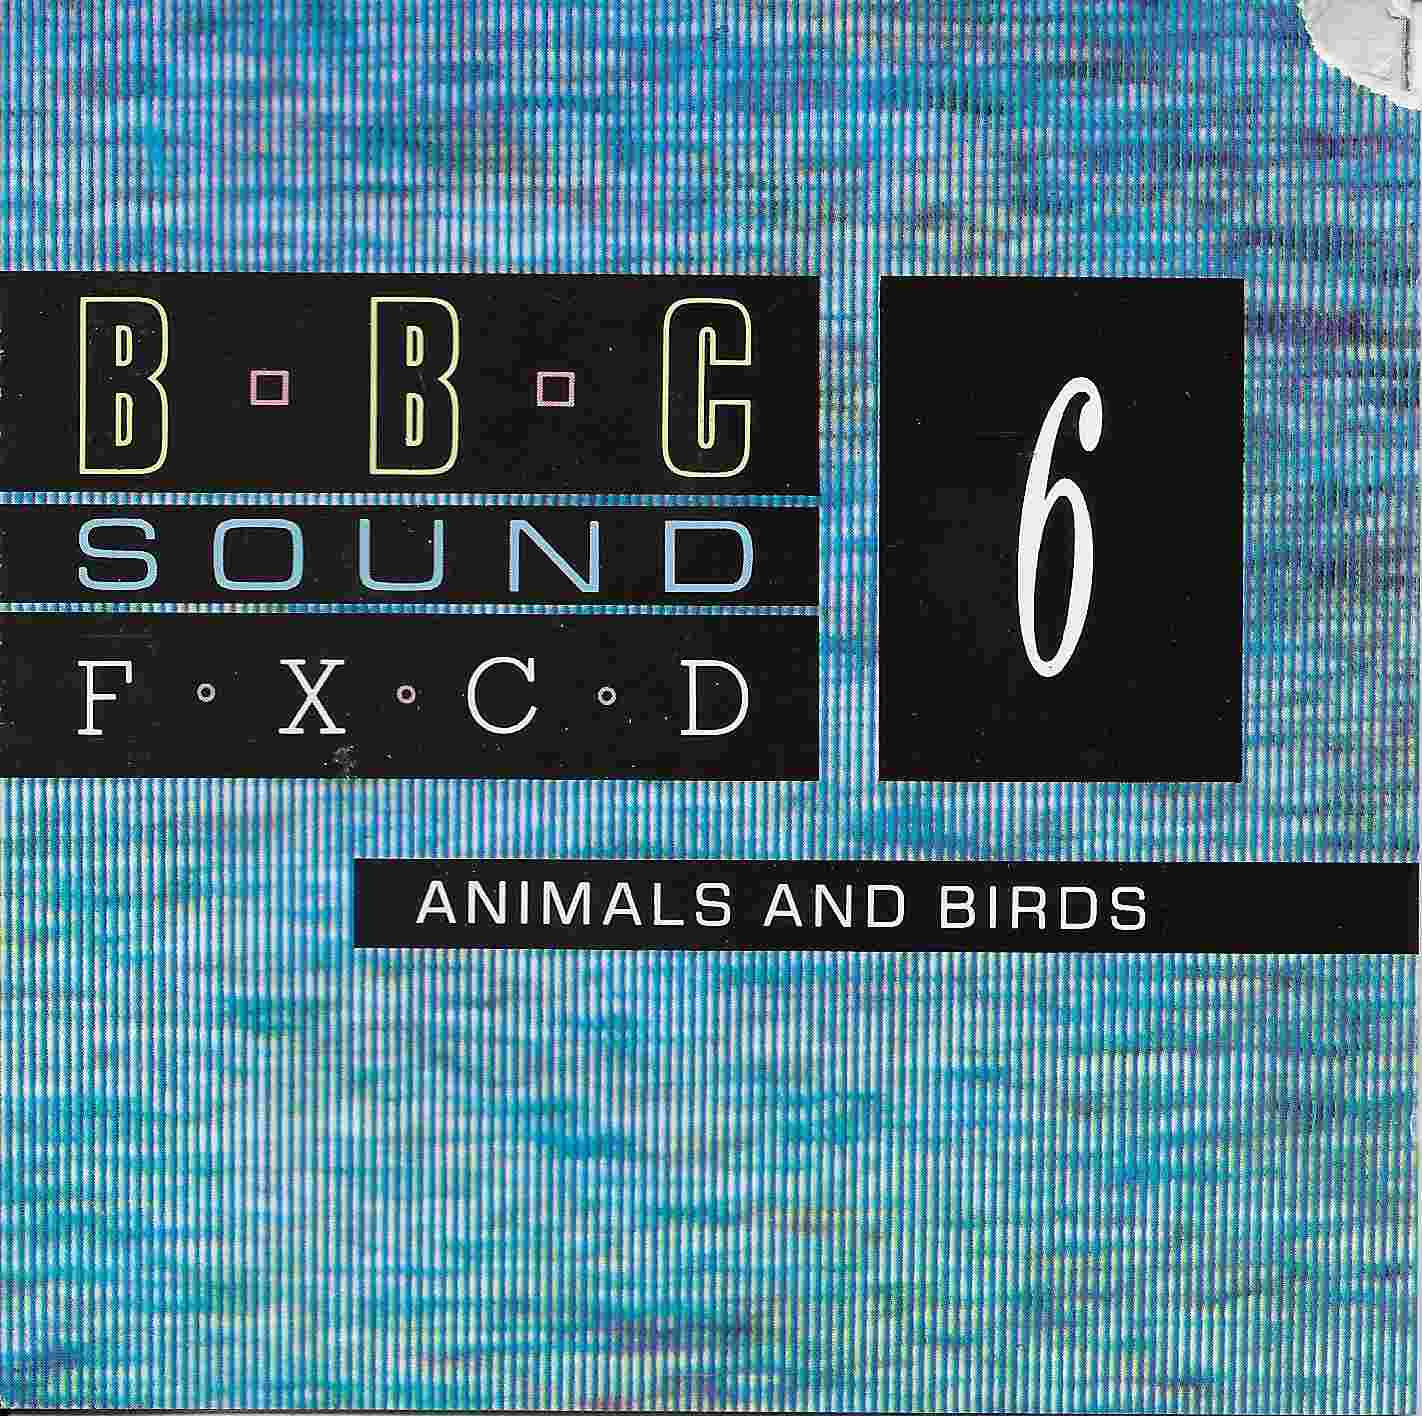 Picture of BBCCD SFX006 Animals and birds by artist Various from the BBC cds - Records and Tapes library